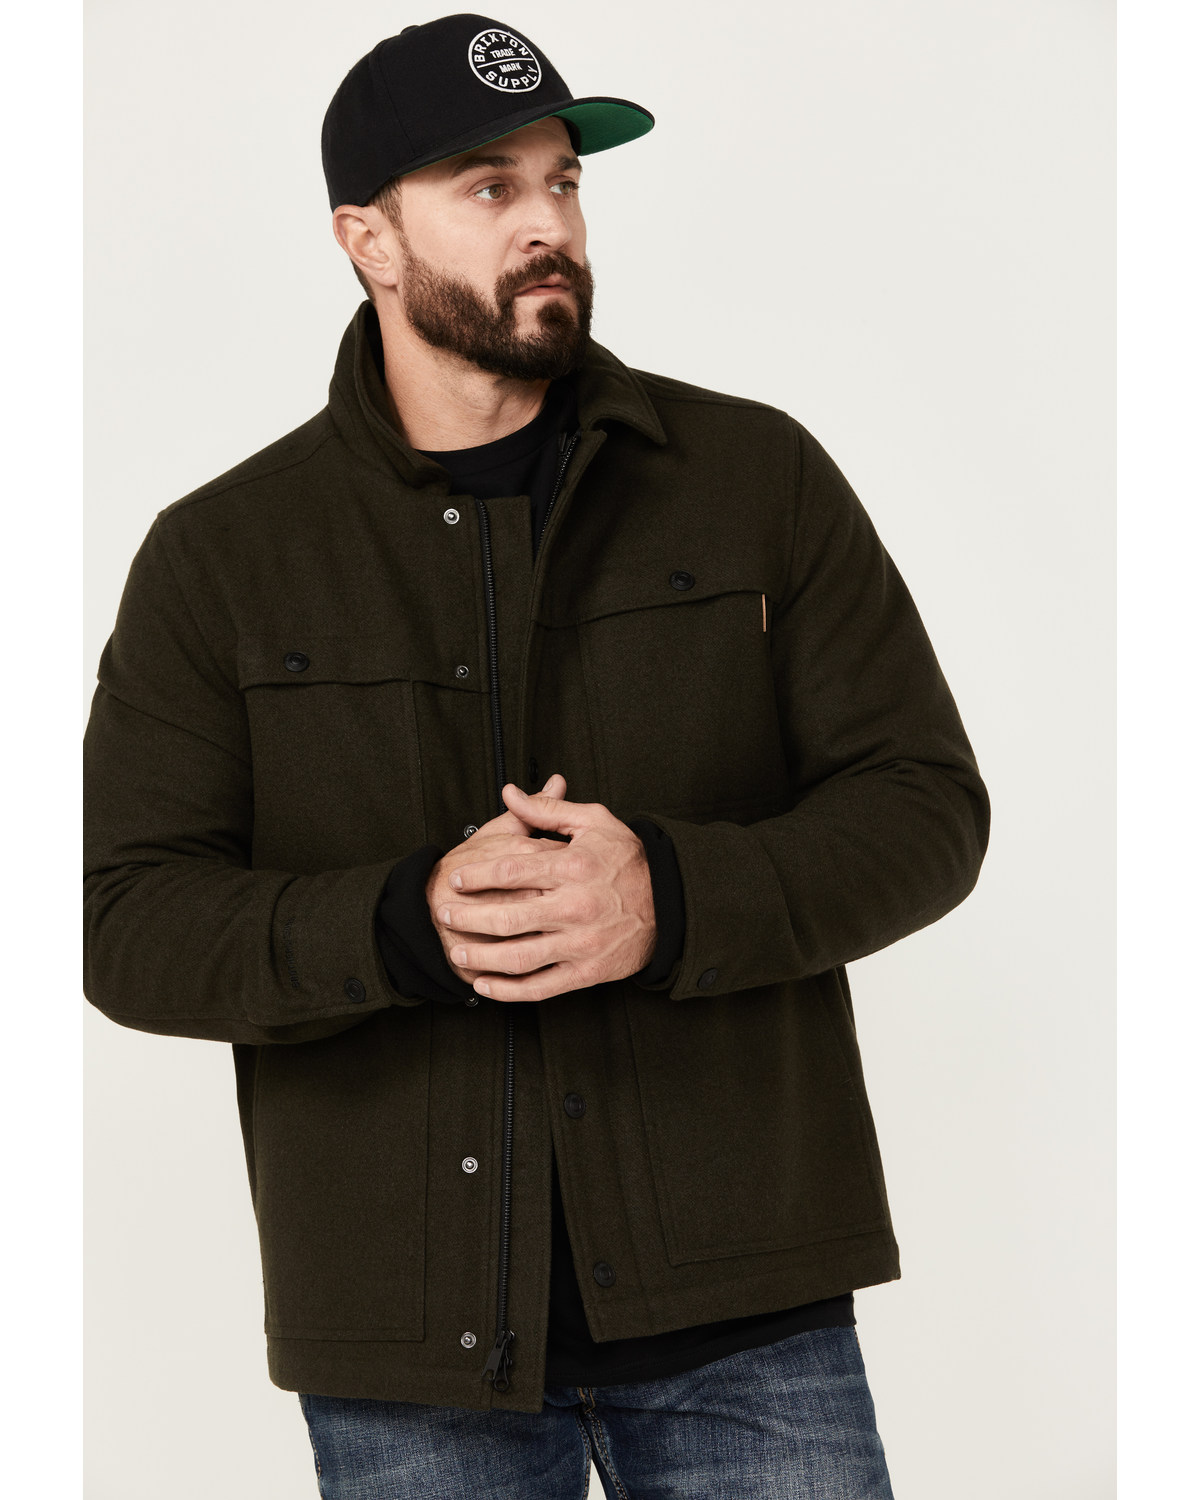 Brothers and Sons Men's Franklin Wool 2 1 Jacket